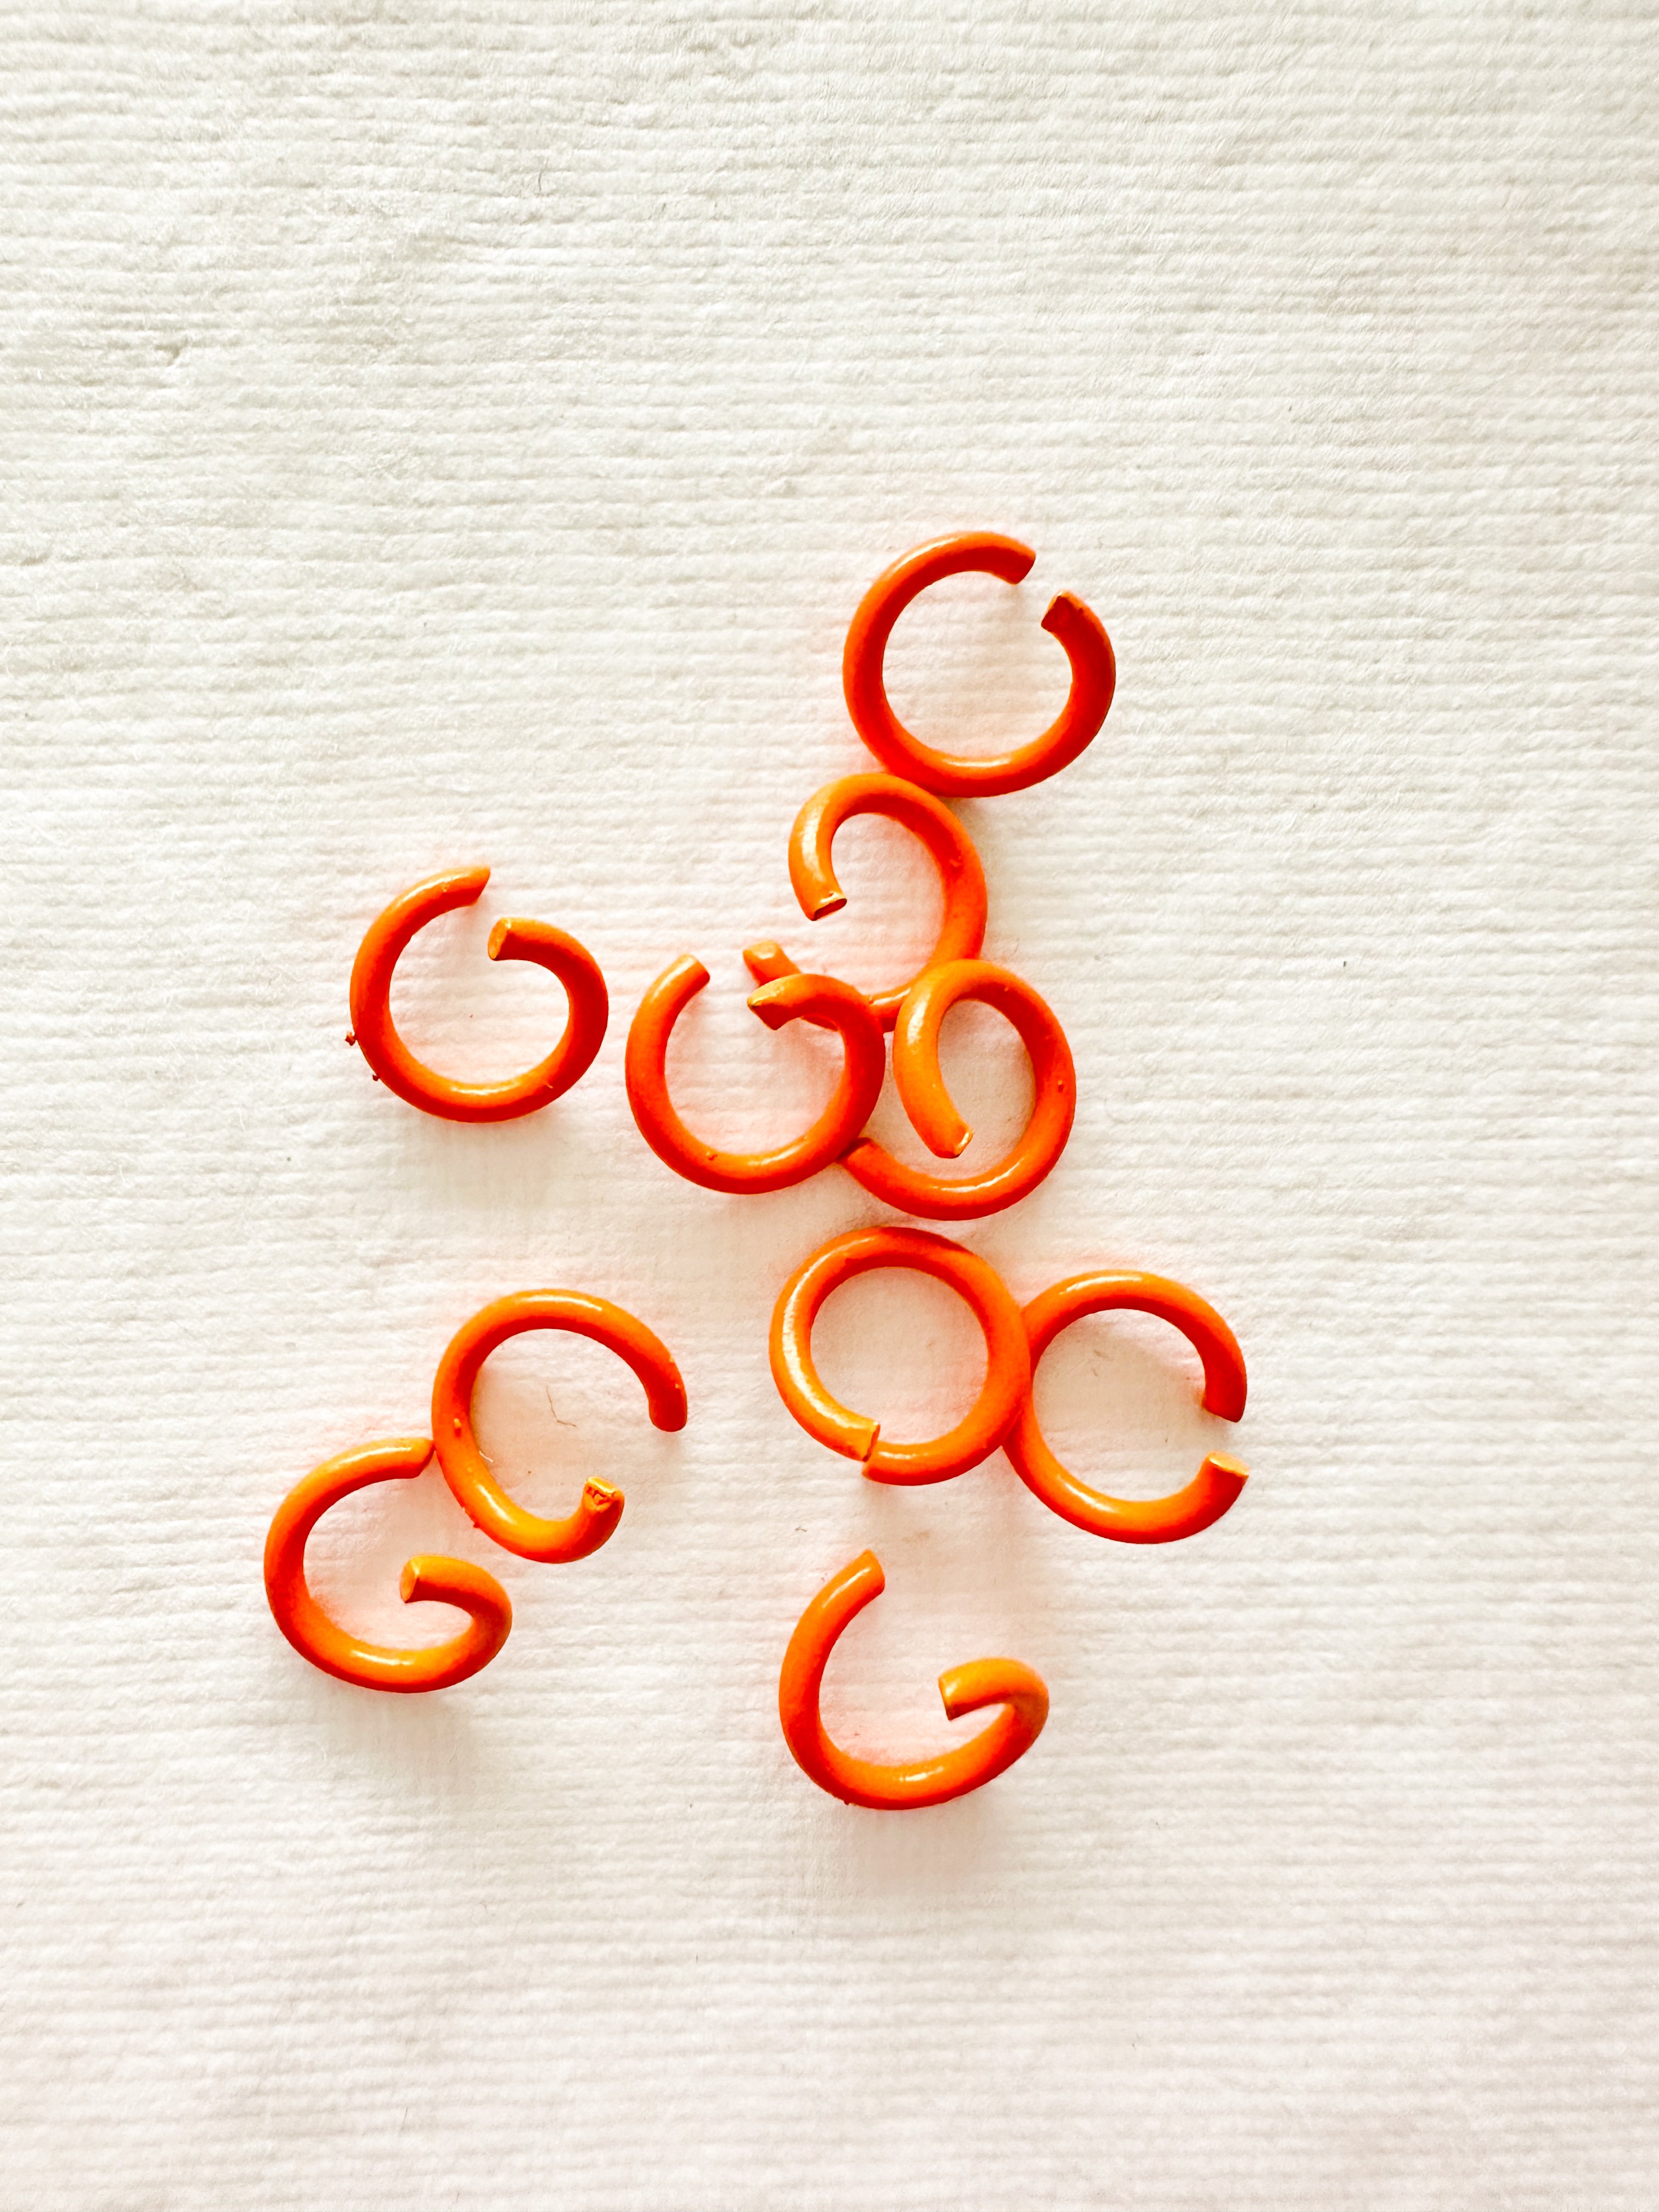 10 Count of 8MM Open Jump Rings